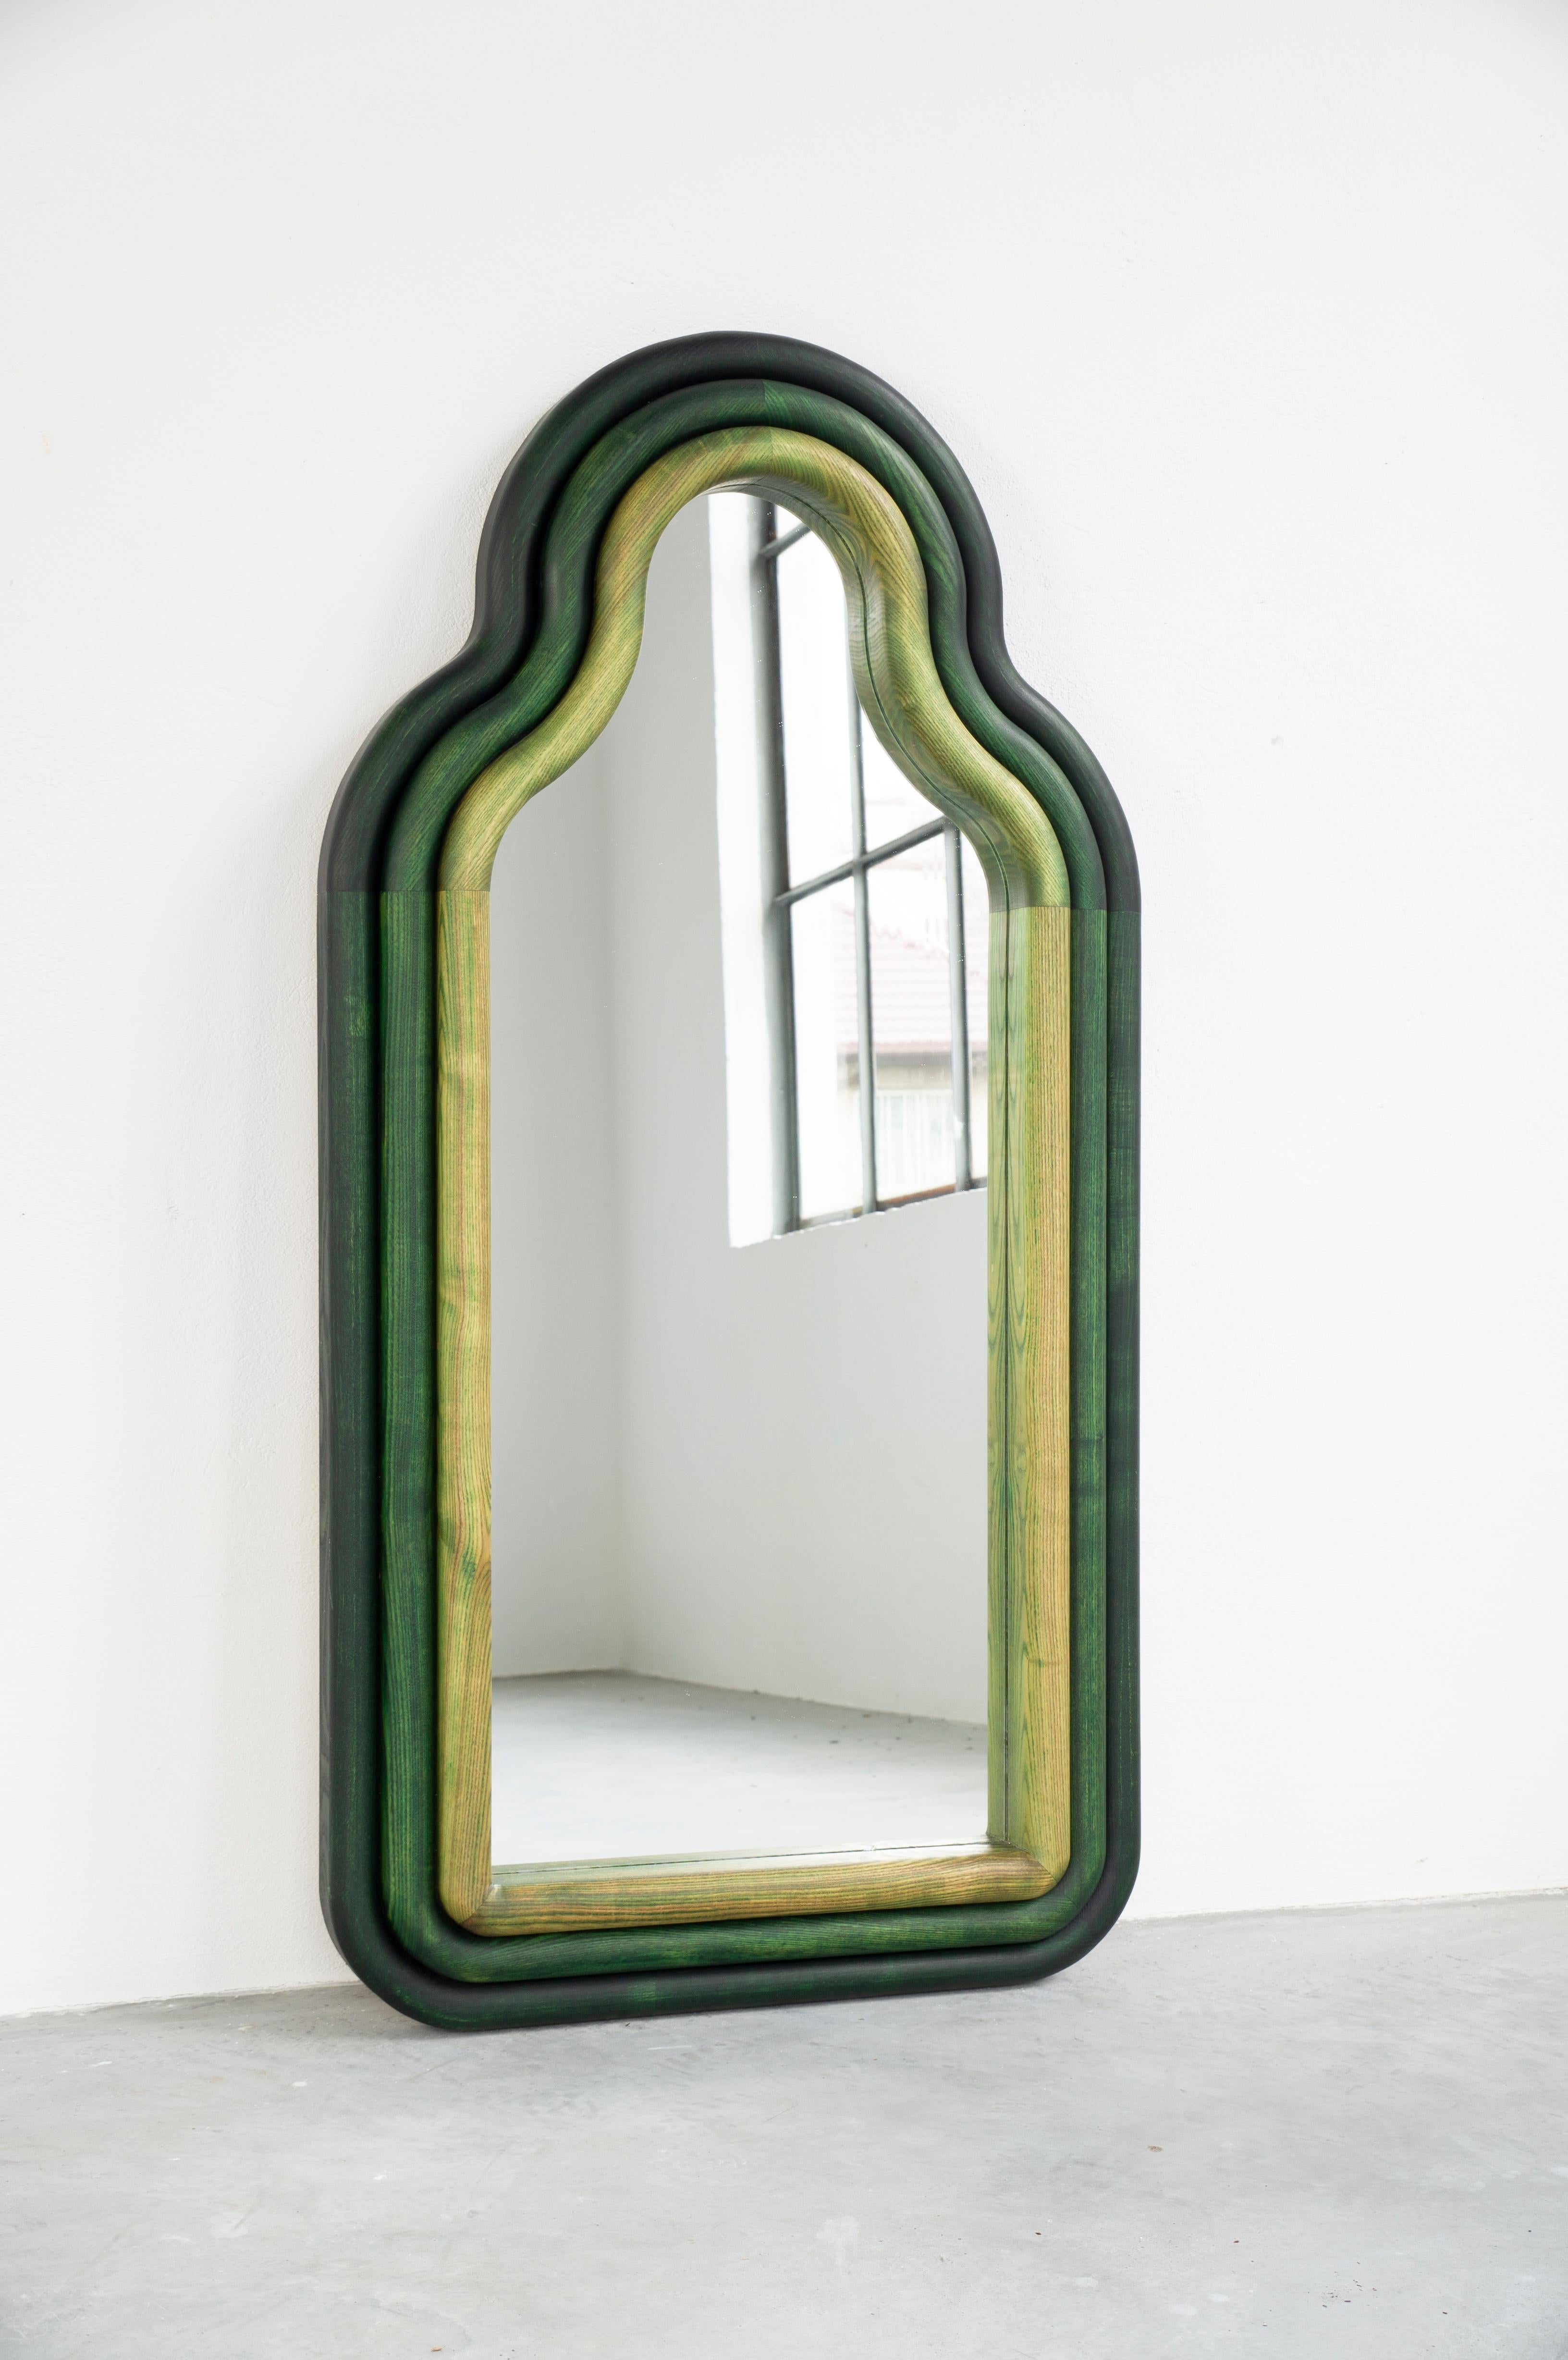 TRN Triple Floor mirror
Signed by Pani Jurek

Dimensions: H 120 x 61.5 x10
Materials: Solid ashwood, hand stained
Colors: Red, blue, green and natural

_________________________________

Pani Jurek is a Polish design studio founded by artist and